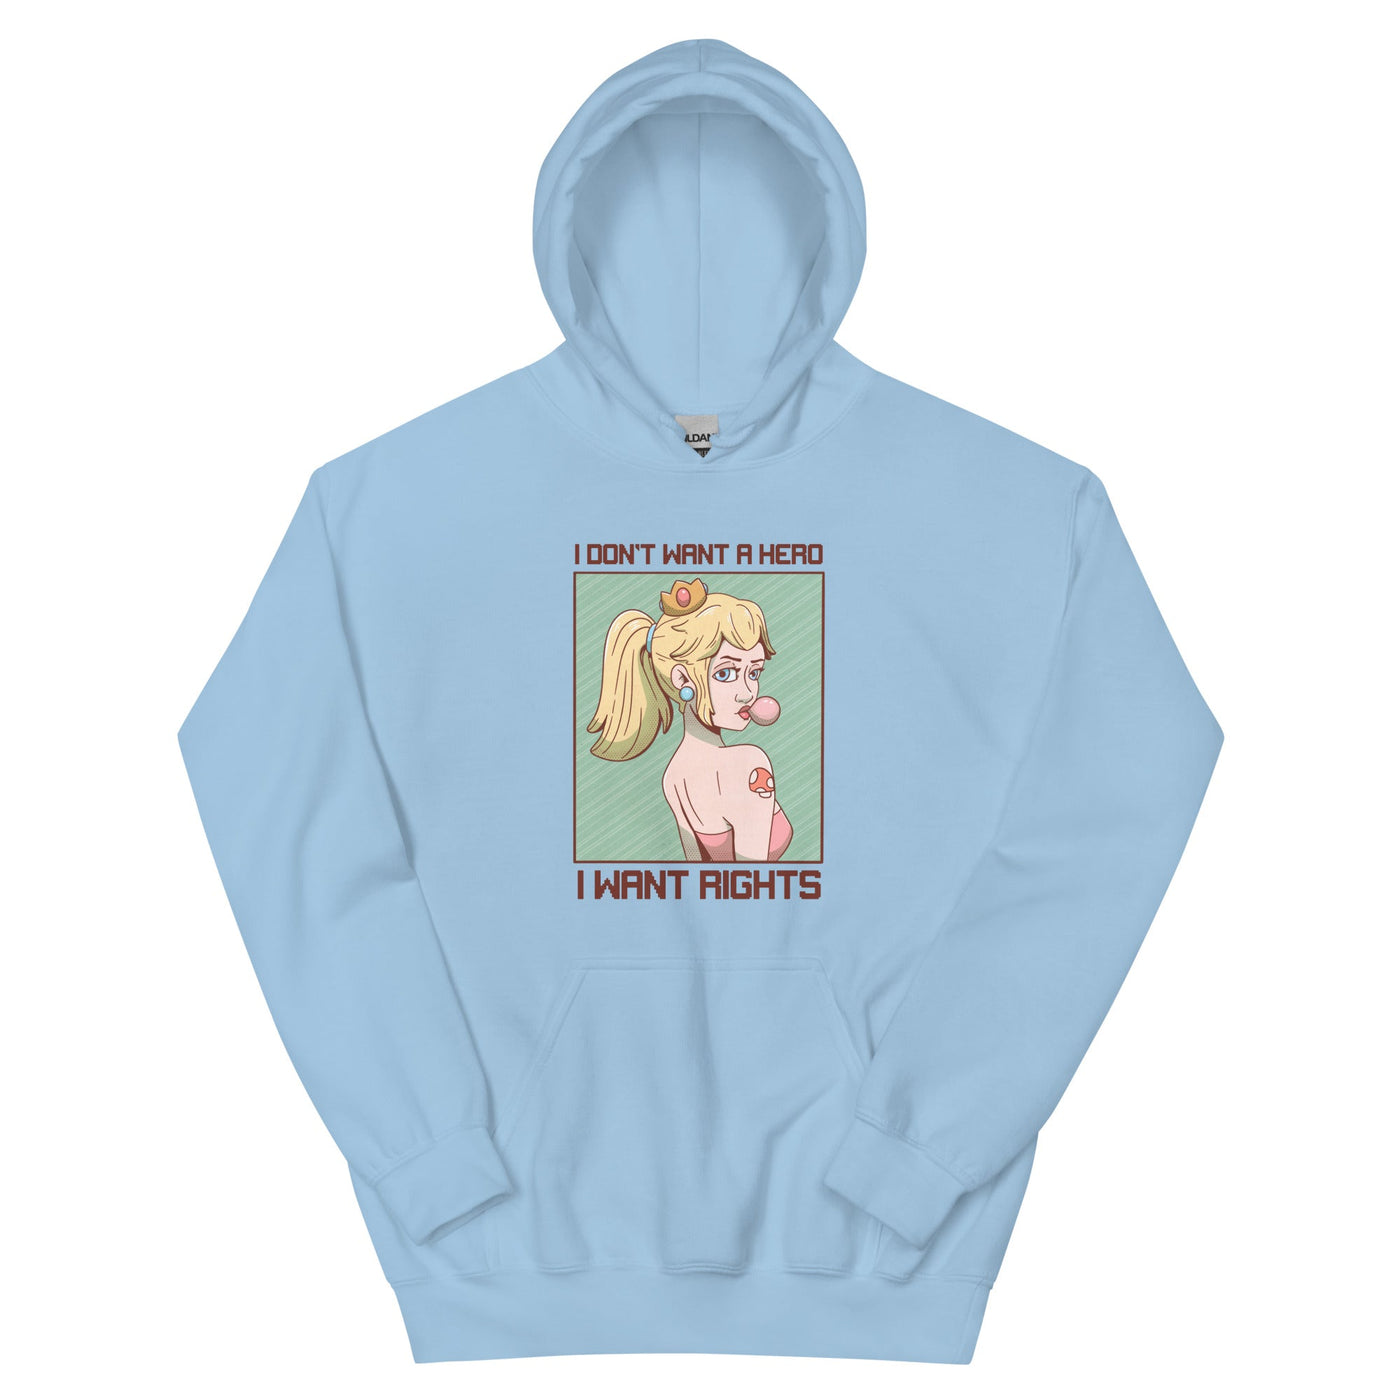 I Want Rights | Unisex Hoodie | Feminist Gamer Threads and Thistles Inventory Light Blue S 